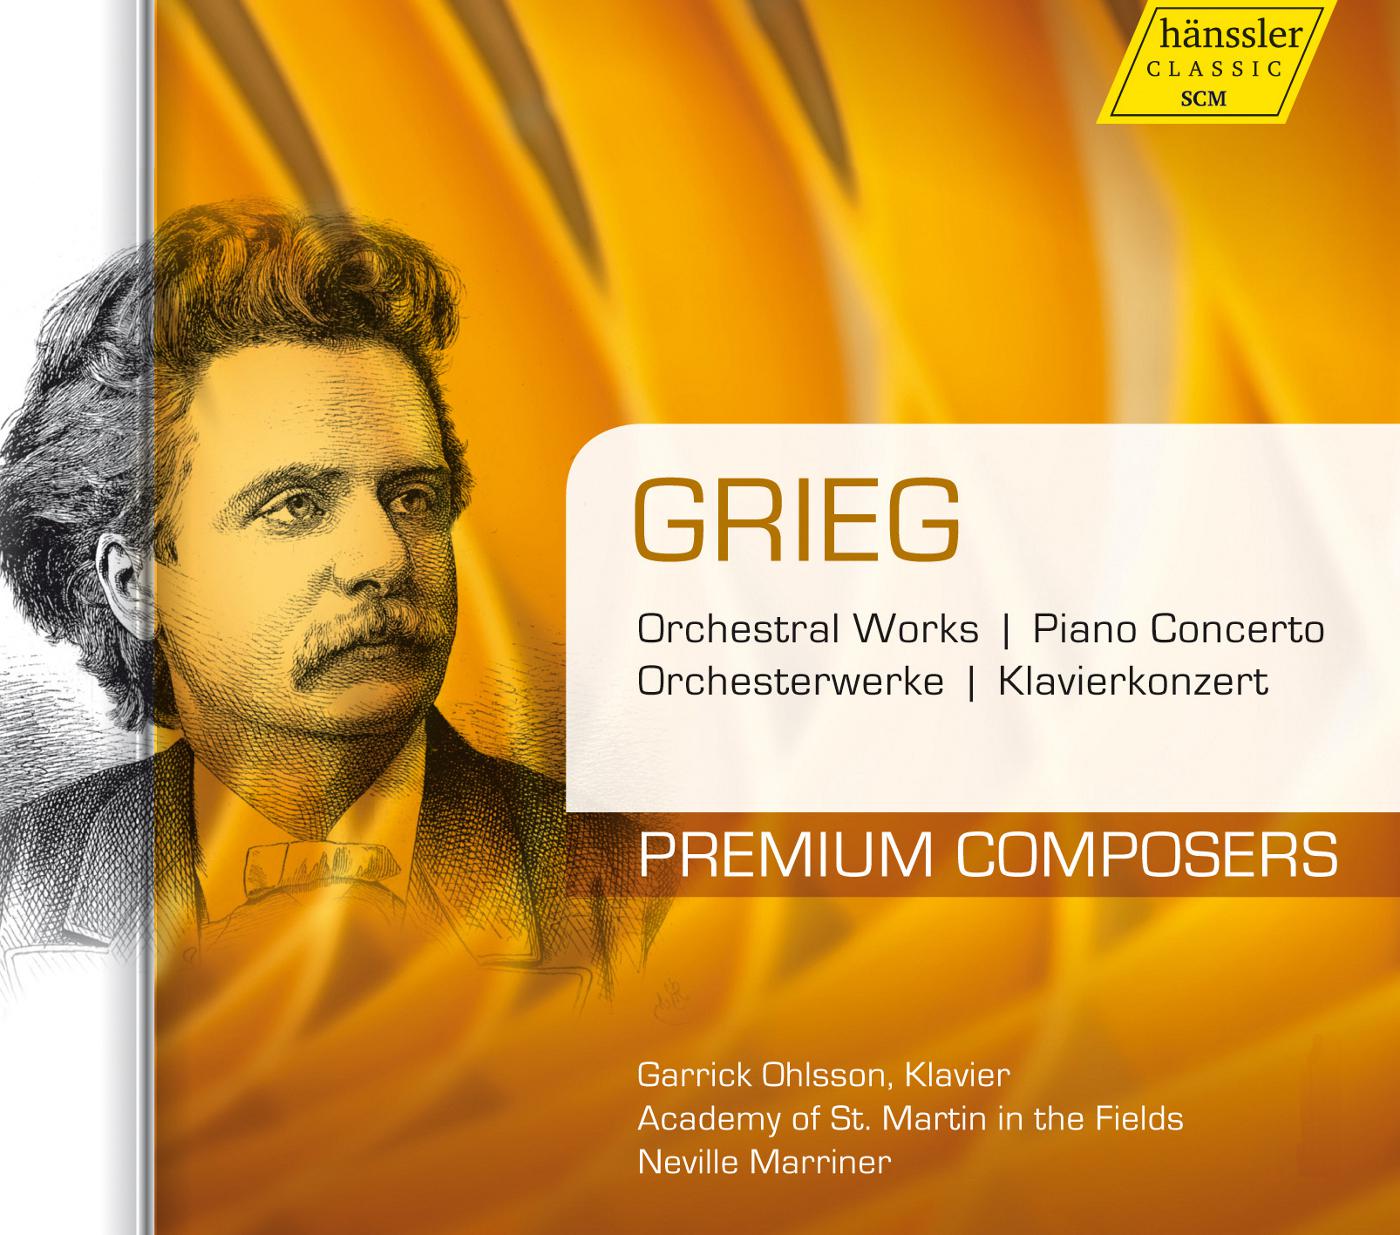 Grieg: Orchestral Works & Piano Concerto in A Minor